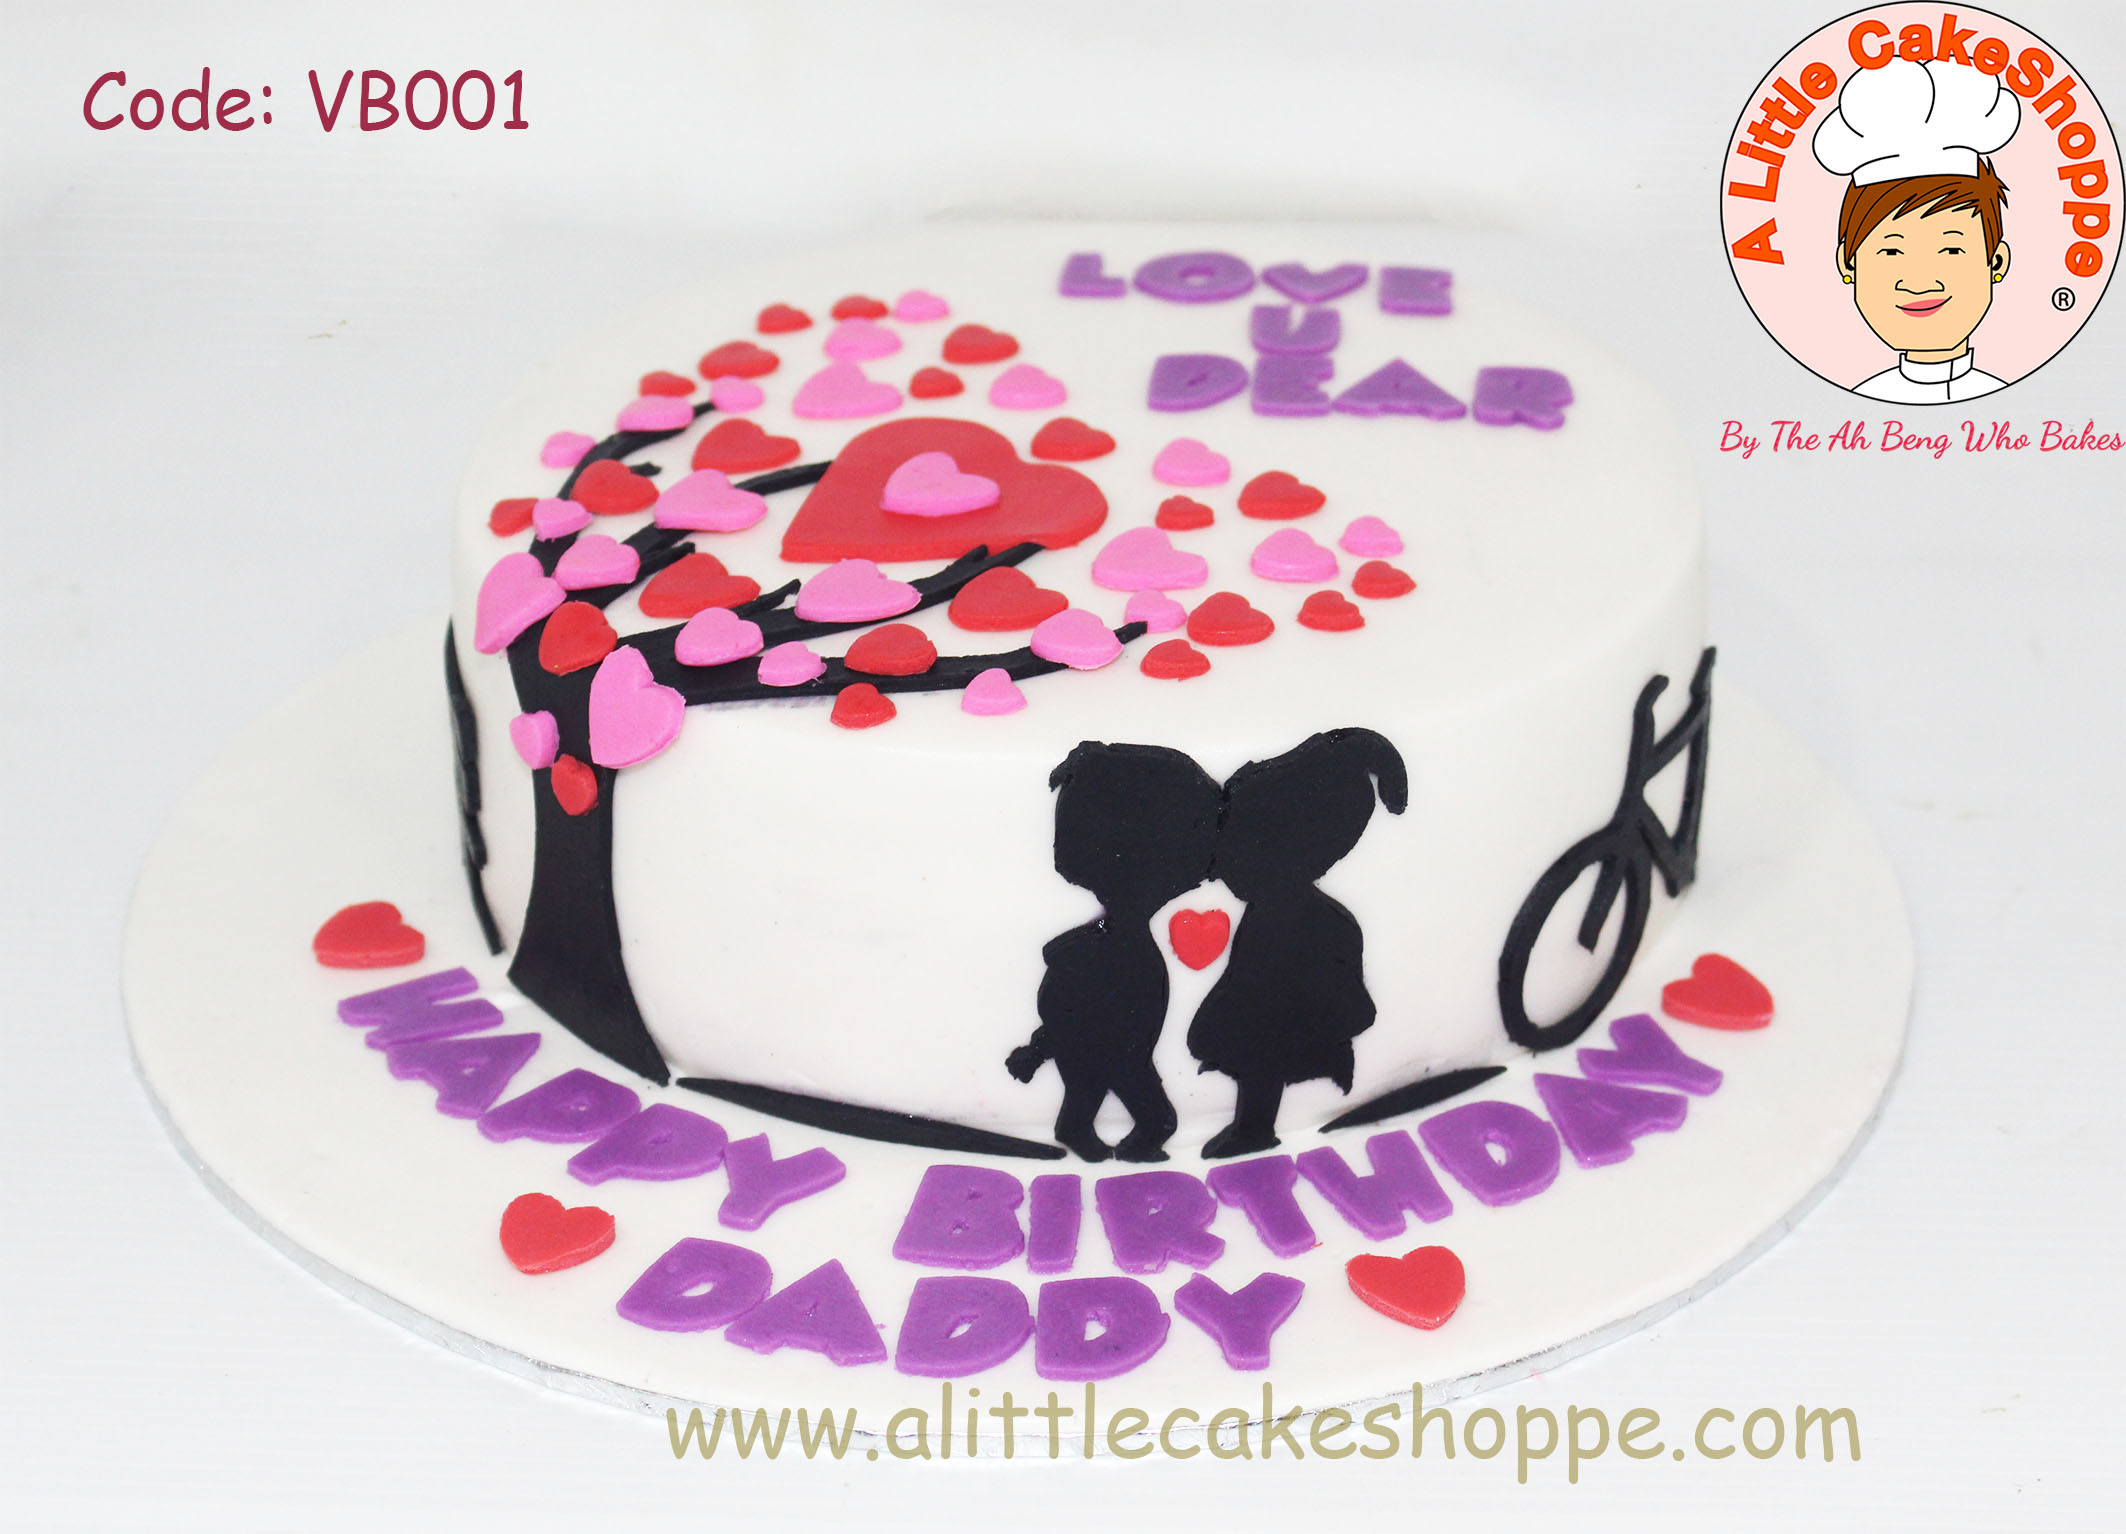 Best Cake Shop Singapore Delivery Best Customised Cake Shop Singapore customise cake custom cake 2D 3D birthday cake cupcakes desserts wedding corporate events anniversary 1st birthday 21st birthday fondant fresh cream buttercream cakes alittlecakeshoppe a little cake shoppe compliments review singapore bakers SG cake shop cakeshop ah beng who bakes sgbakes novelty cakes sgcakes licensed sfa nea cake delivery celebration cakes kids birthday cake surprise cake adult children parenting valentine day cake